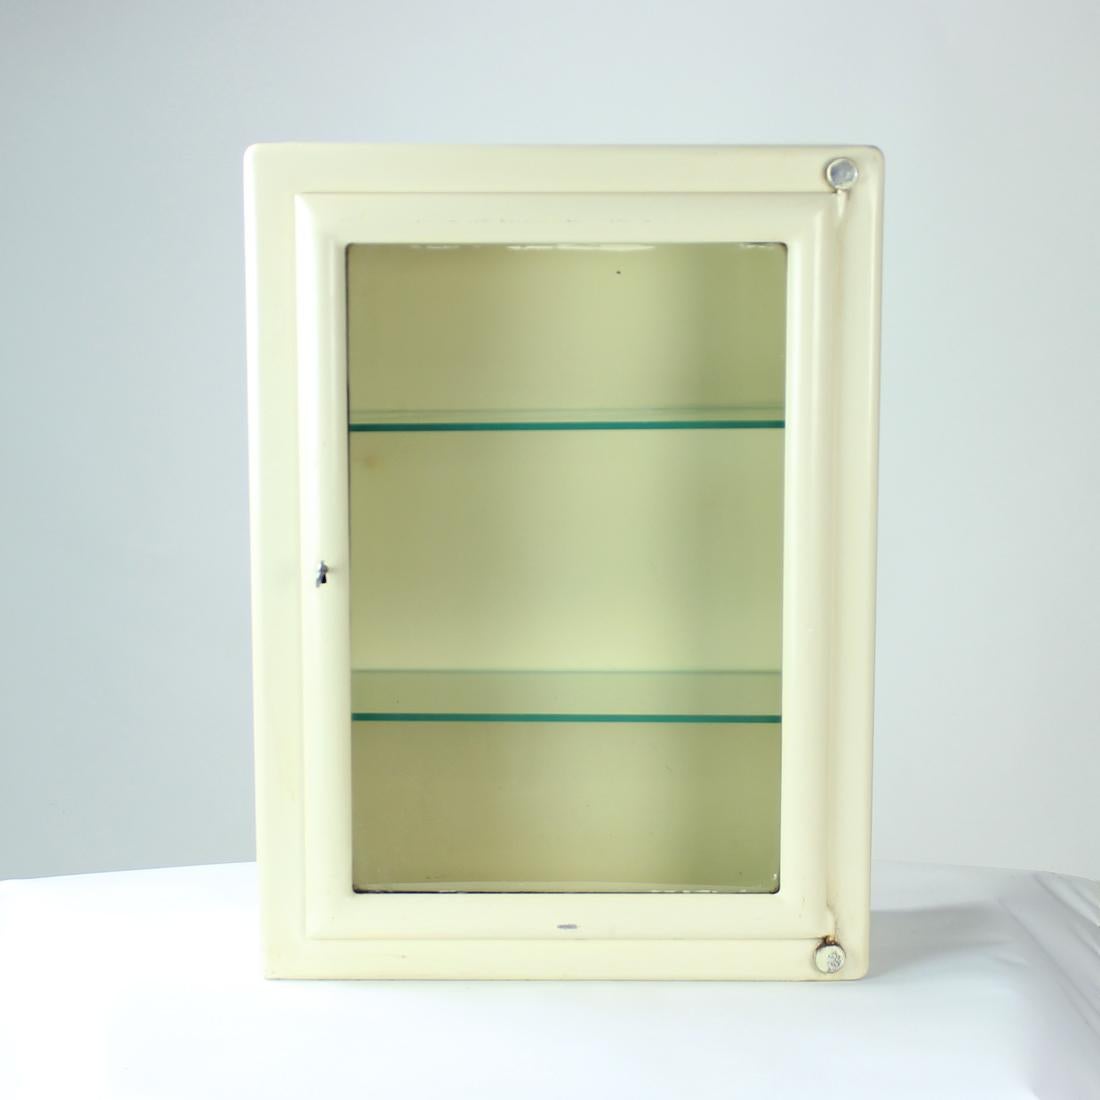 Beautiful vintage medical cabinet produced in Czechoslovakia in 1950s. Originally, the cabinet has been used in hospitals. The cabinet is wall-mounted piece with two brackets to hold the piece on the wall safely. The cabinet is made of steel with